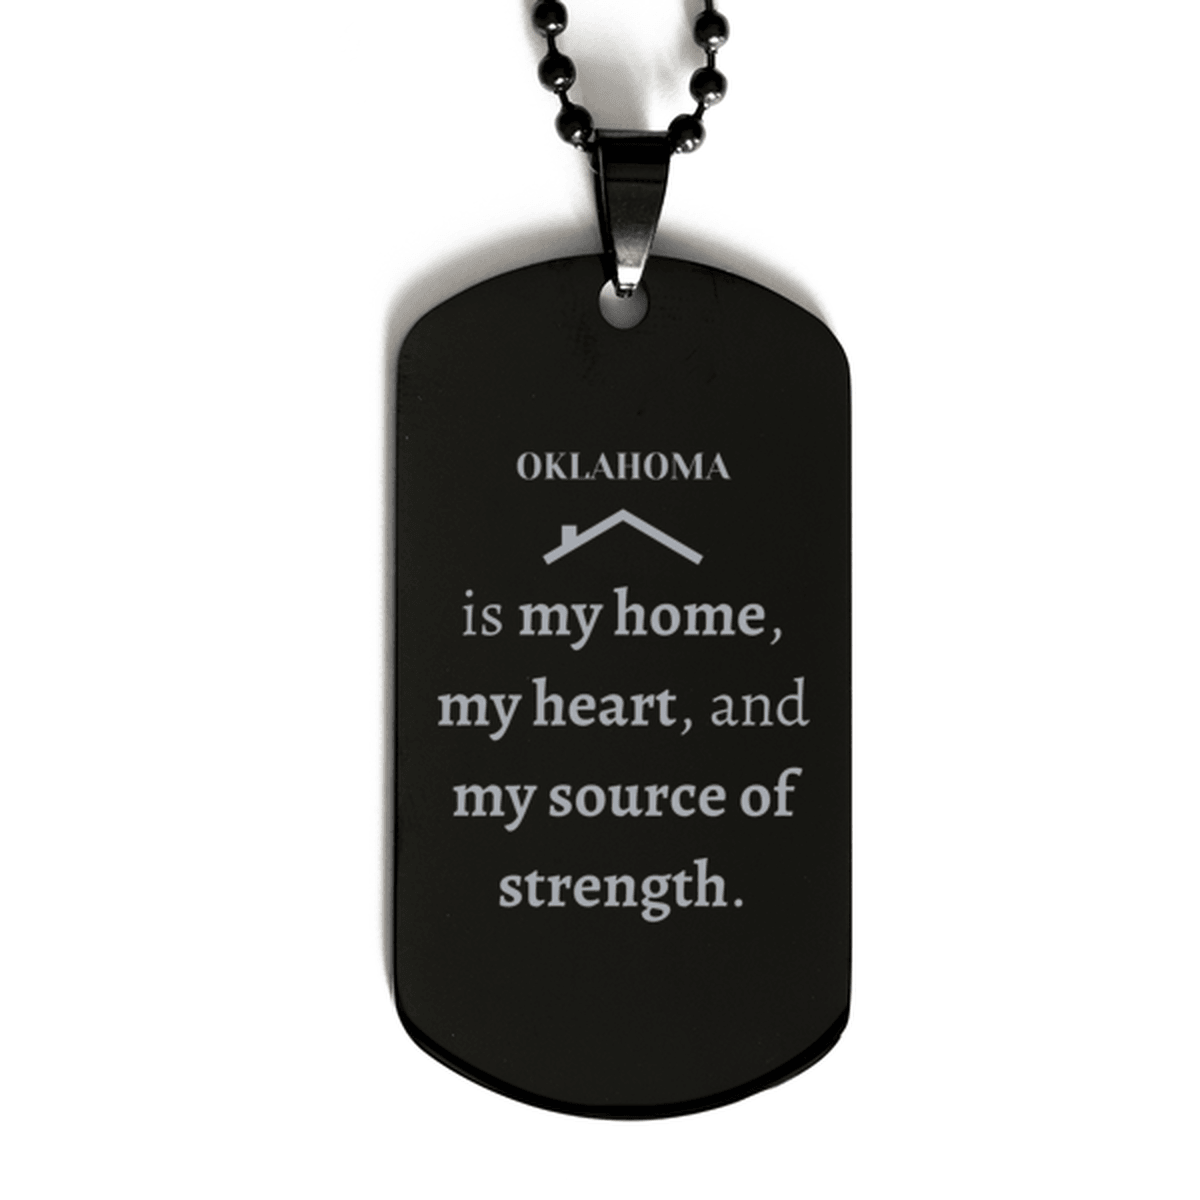 Oklahoma is my home Gifts, Lovely Oklahoma Birthday Christmas Black Dog Tag For People from Oklahoma, Men, Women, Friends - Mallard Moon Gift Shop